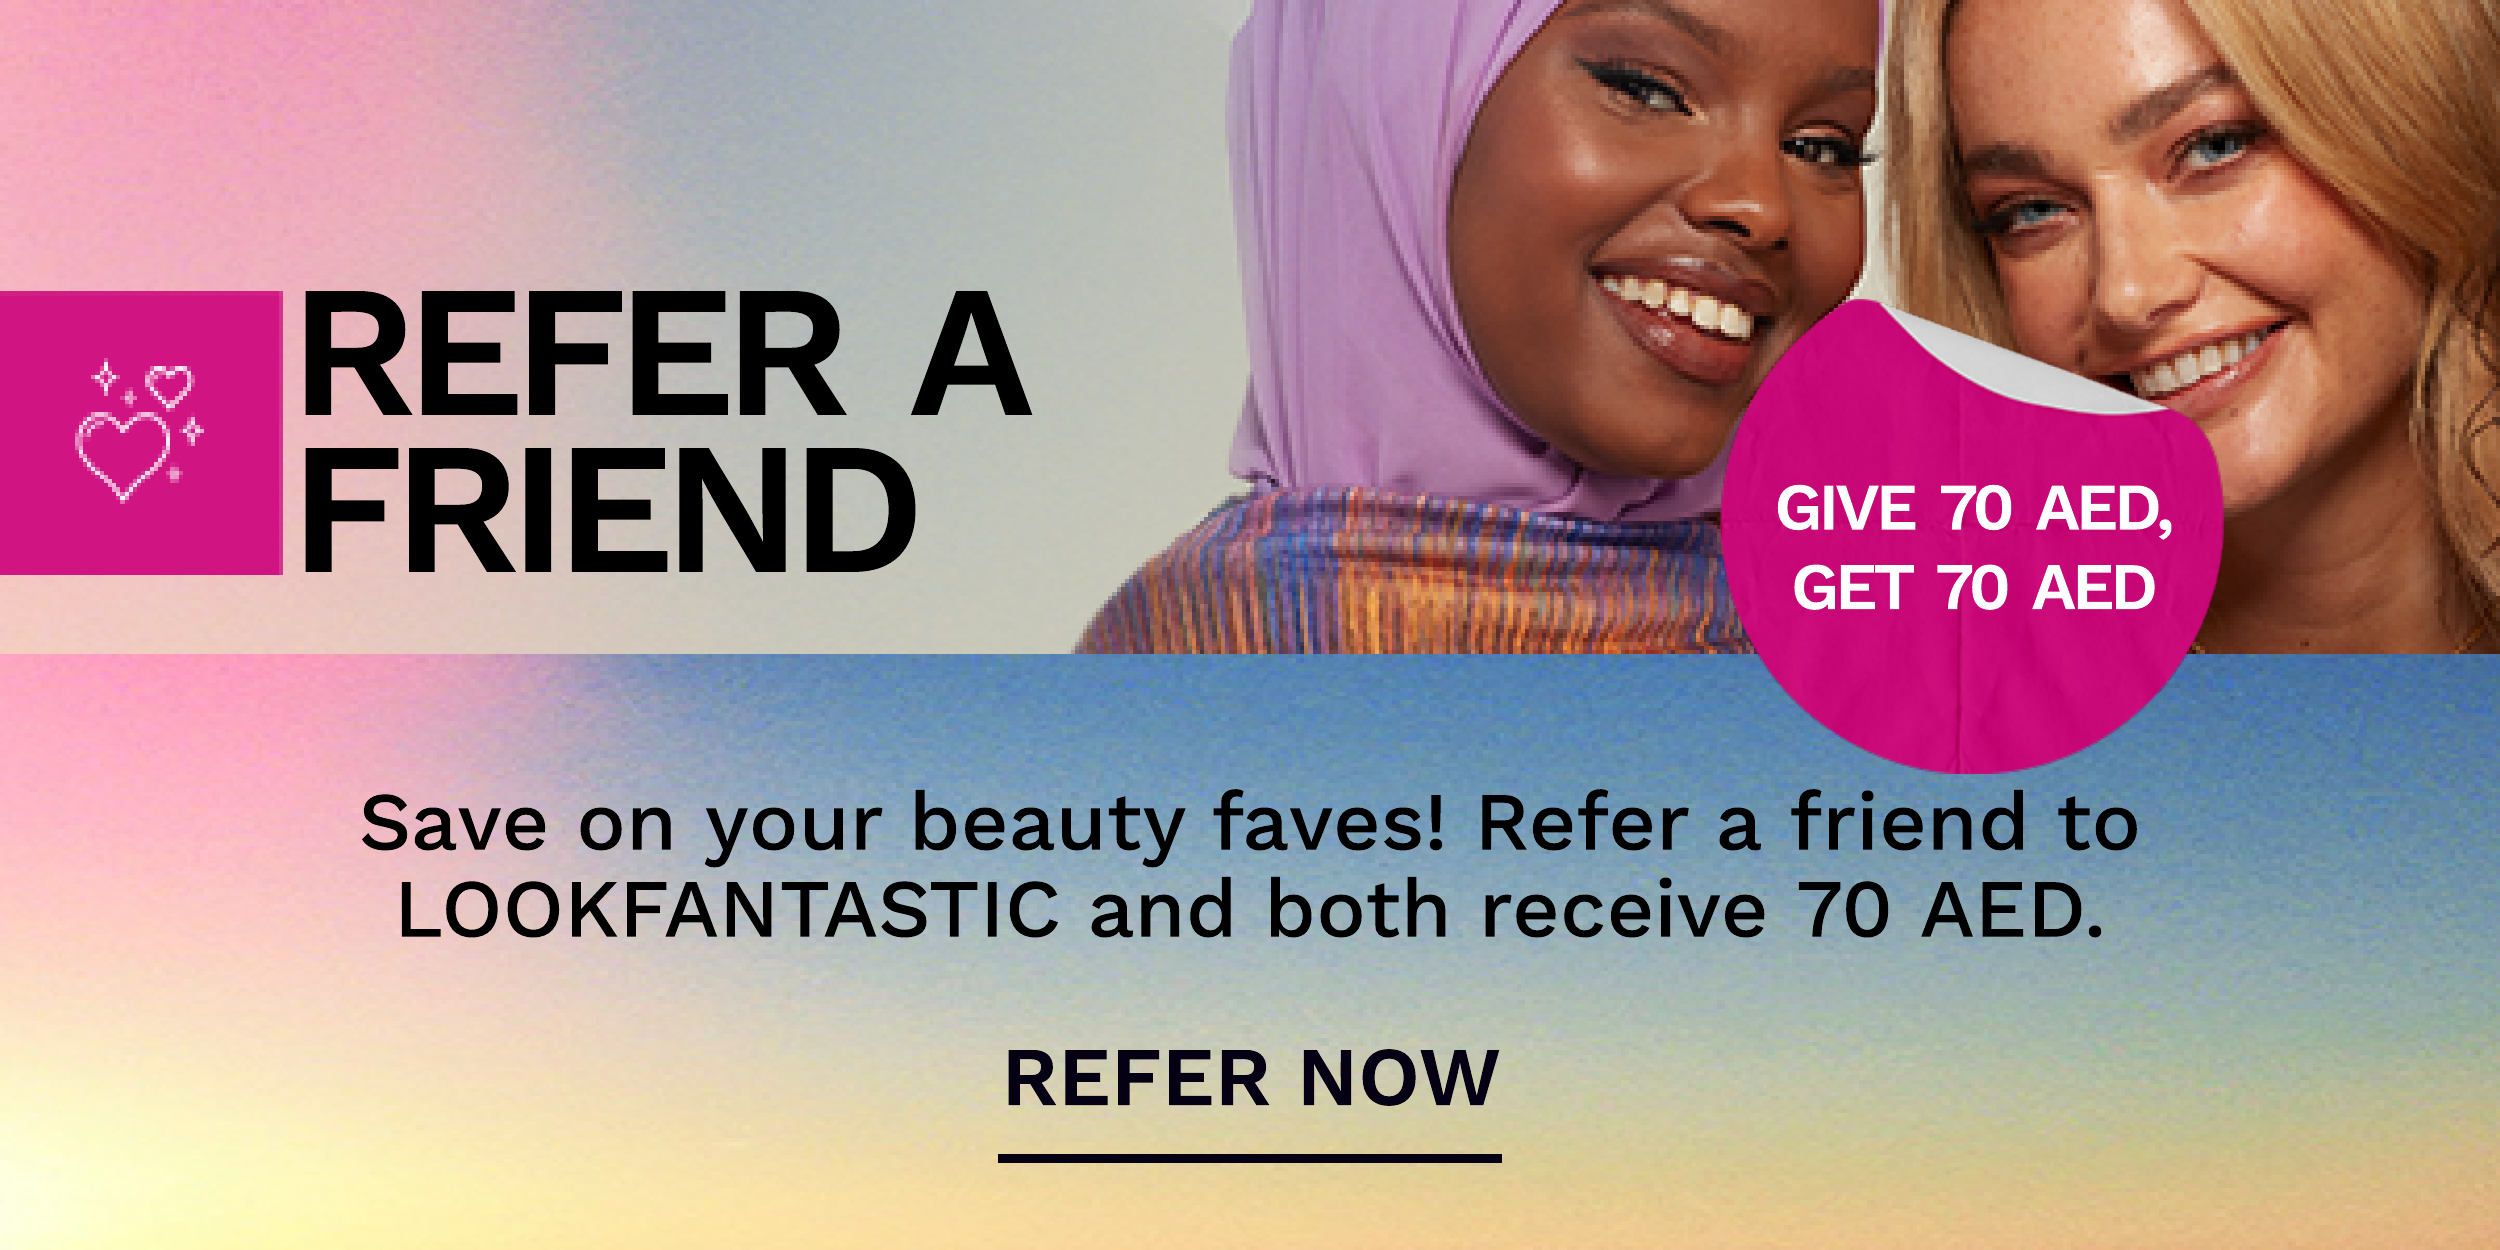 REFER A FRIEND s AT e Save on your beauty faves! Refer a friend to LOOKFANTASTIC and both receive 70 AED. REFER NOW 